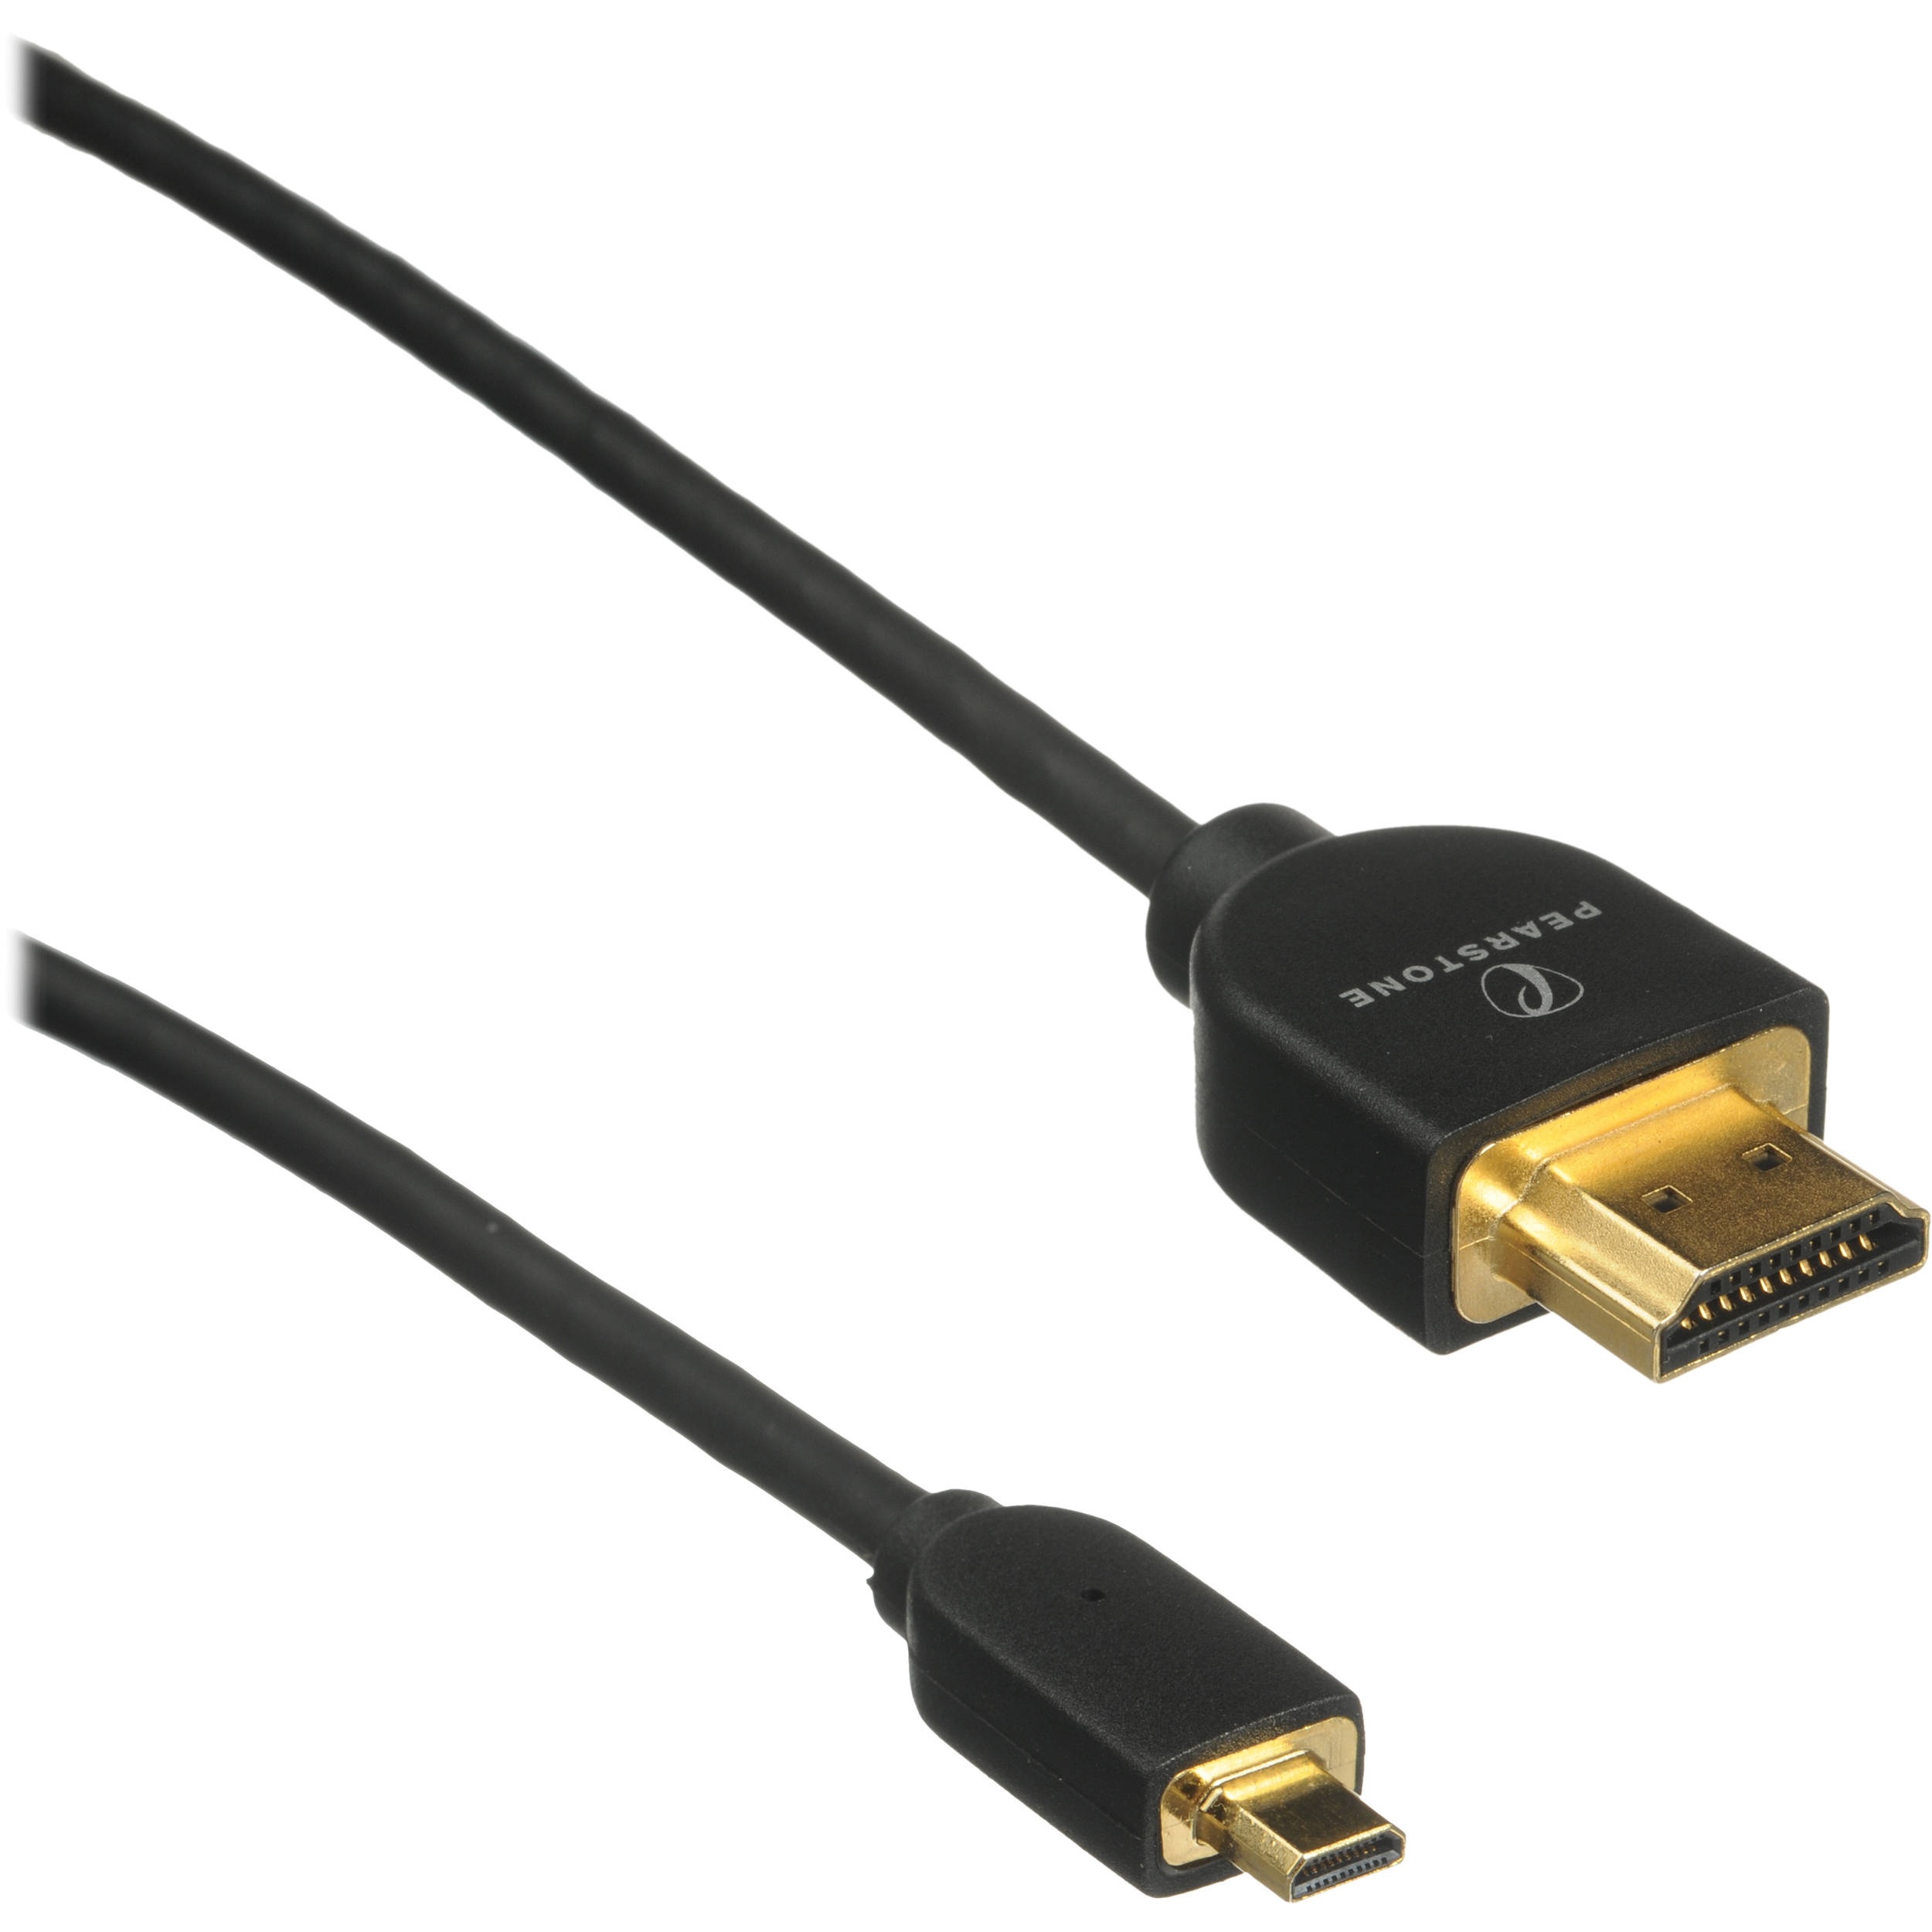 Pearstone HDD-103 High-Speed HDMI to Micro-HDMI Cable with Ethernet (3')